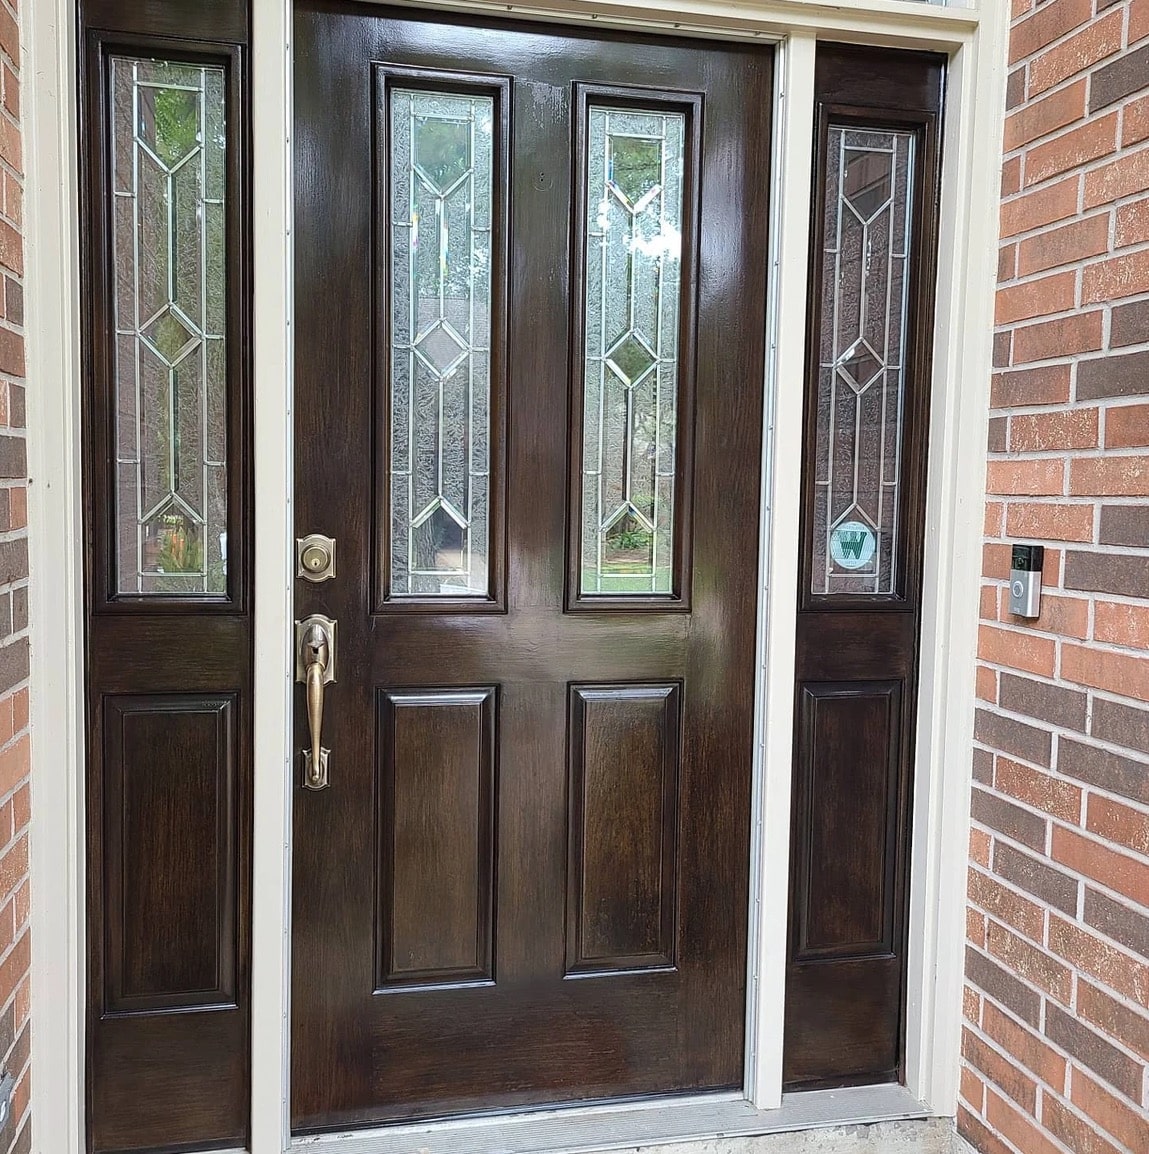 Expert Guide to Choosing the Perfect Stain for Your Front Door